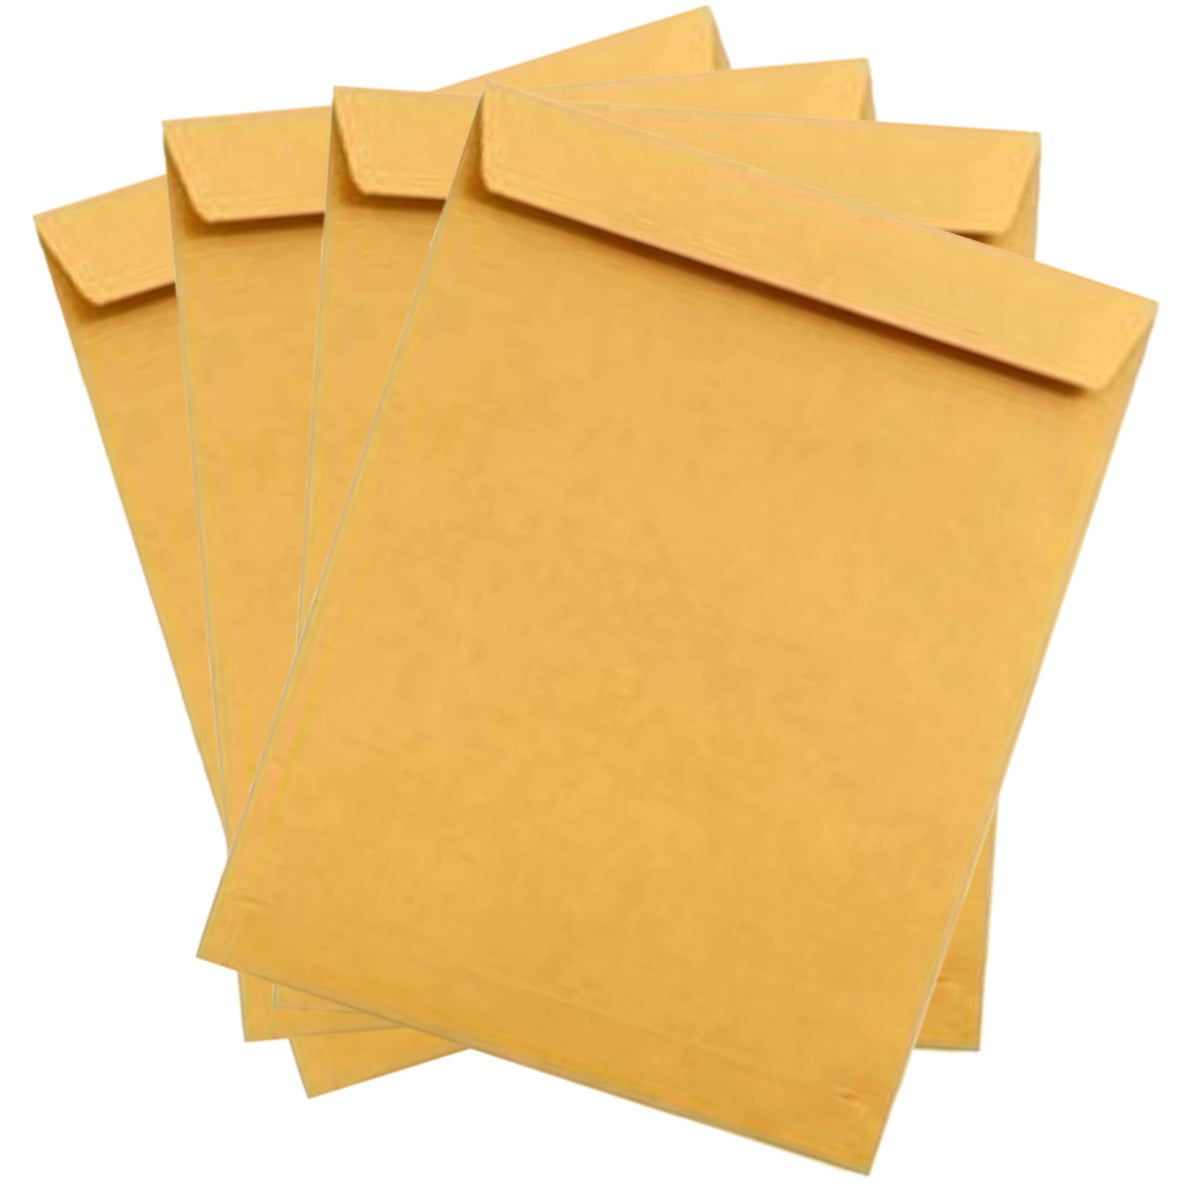 Hispapel Envelope 305 x 254 mm, 12x10 inches, US Letter, 90gsm, Brown